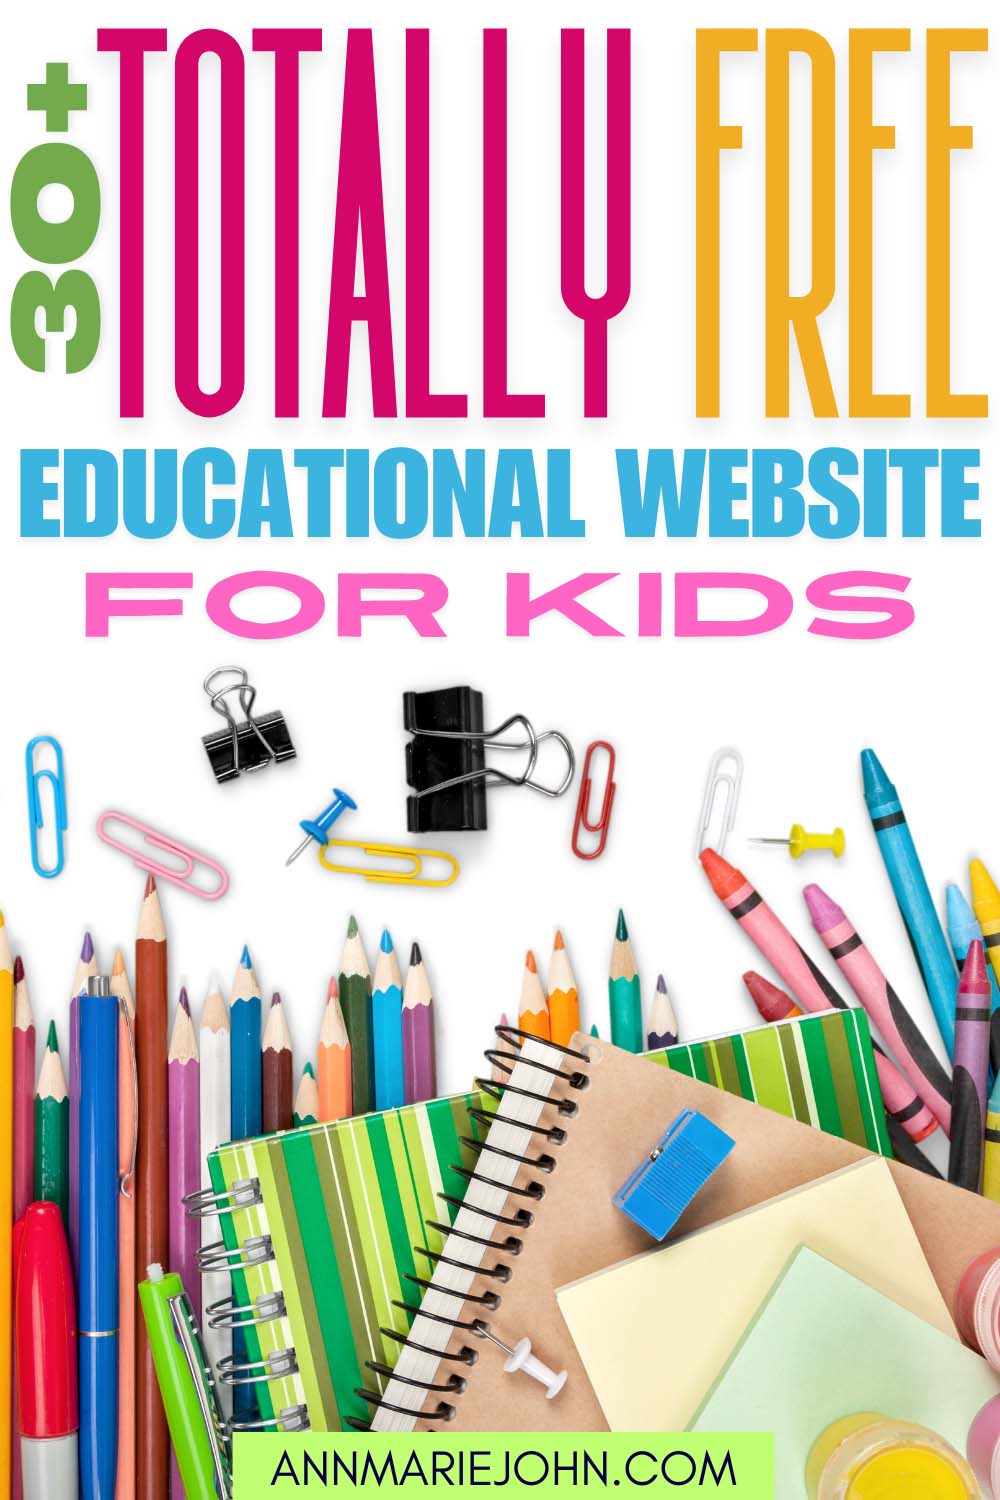 Totally Free Educational Website for Kids